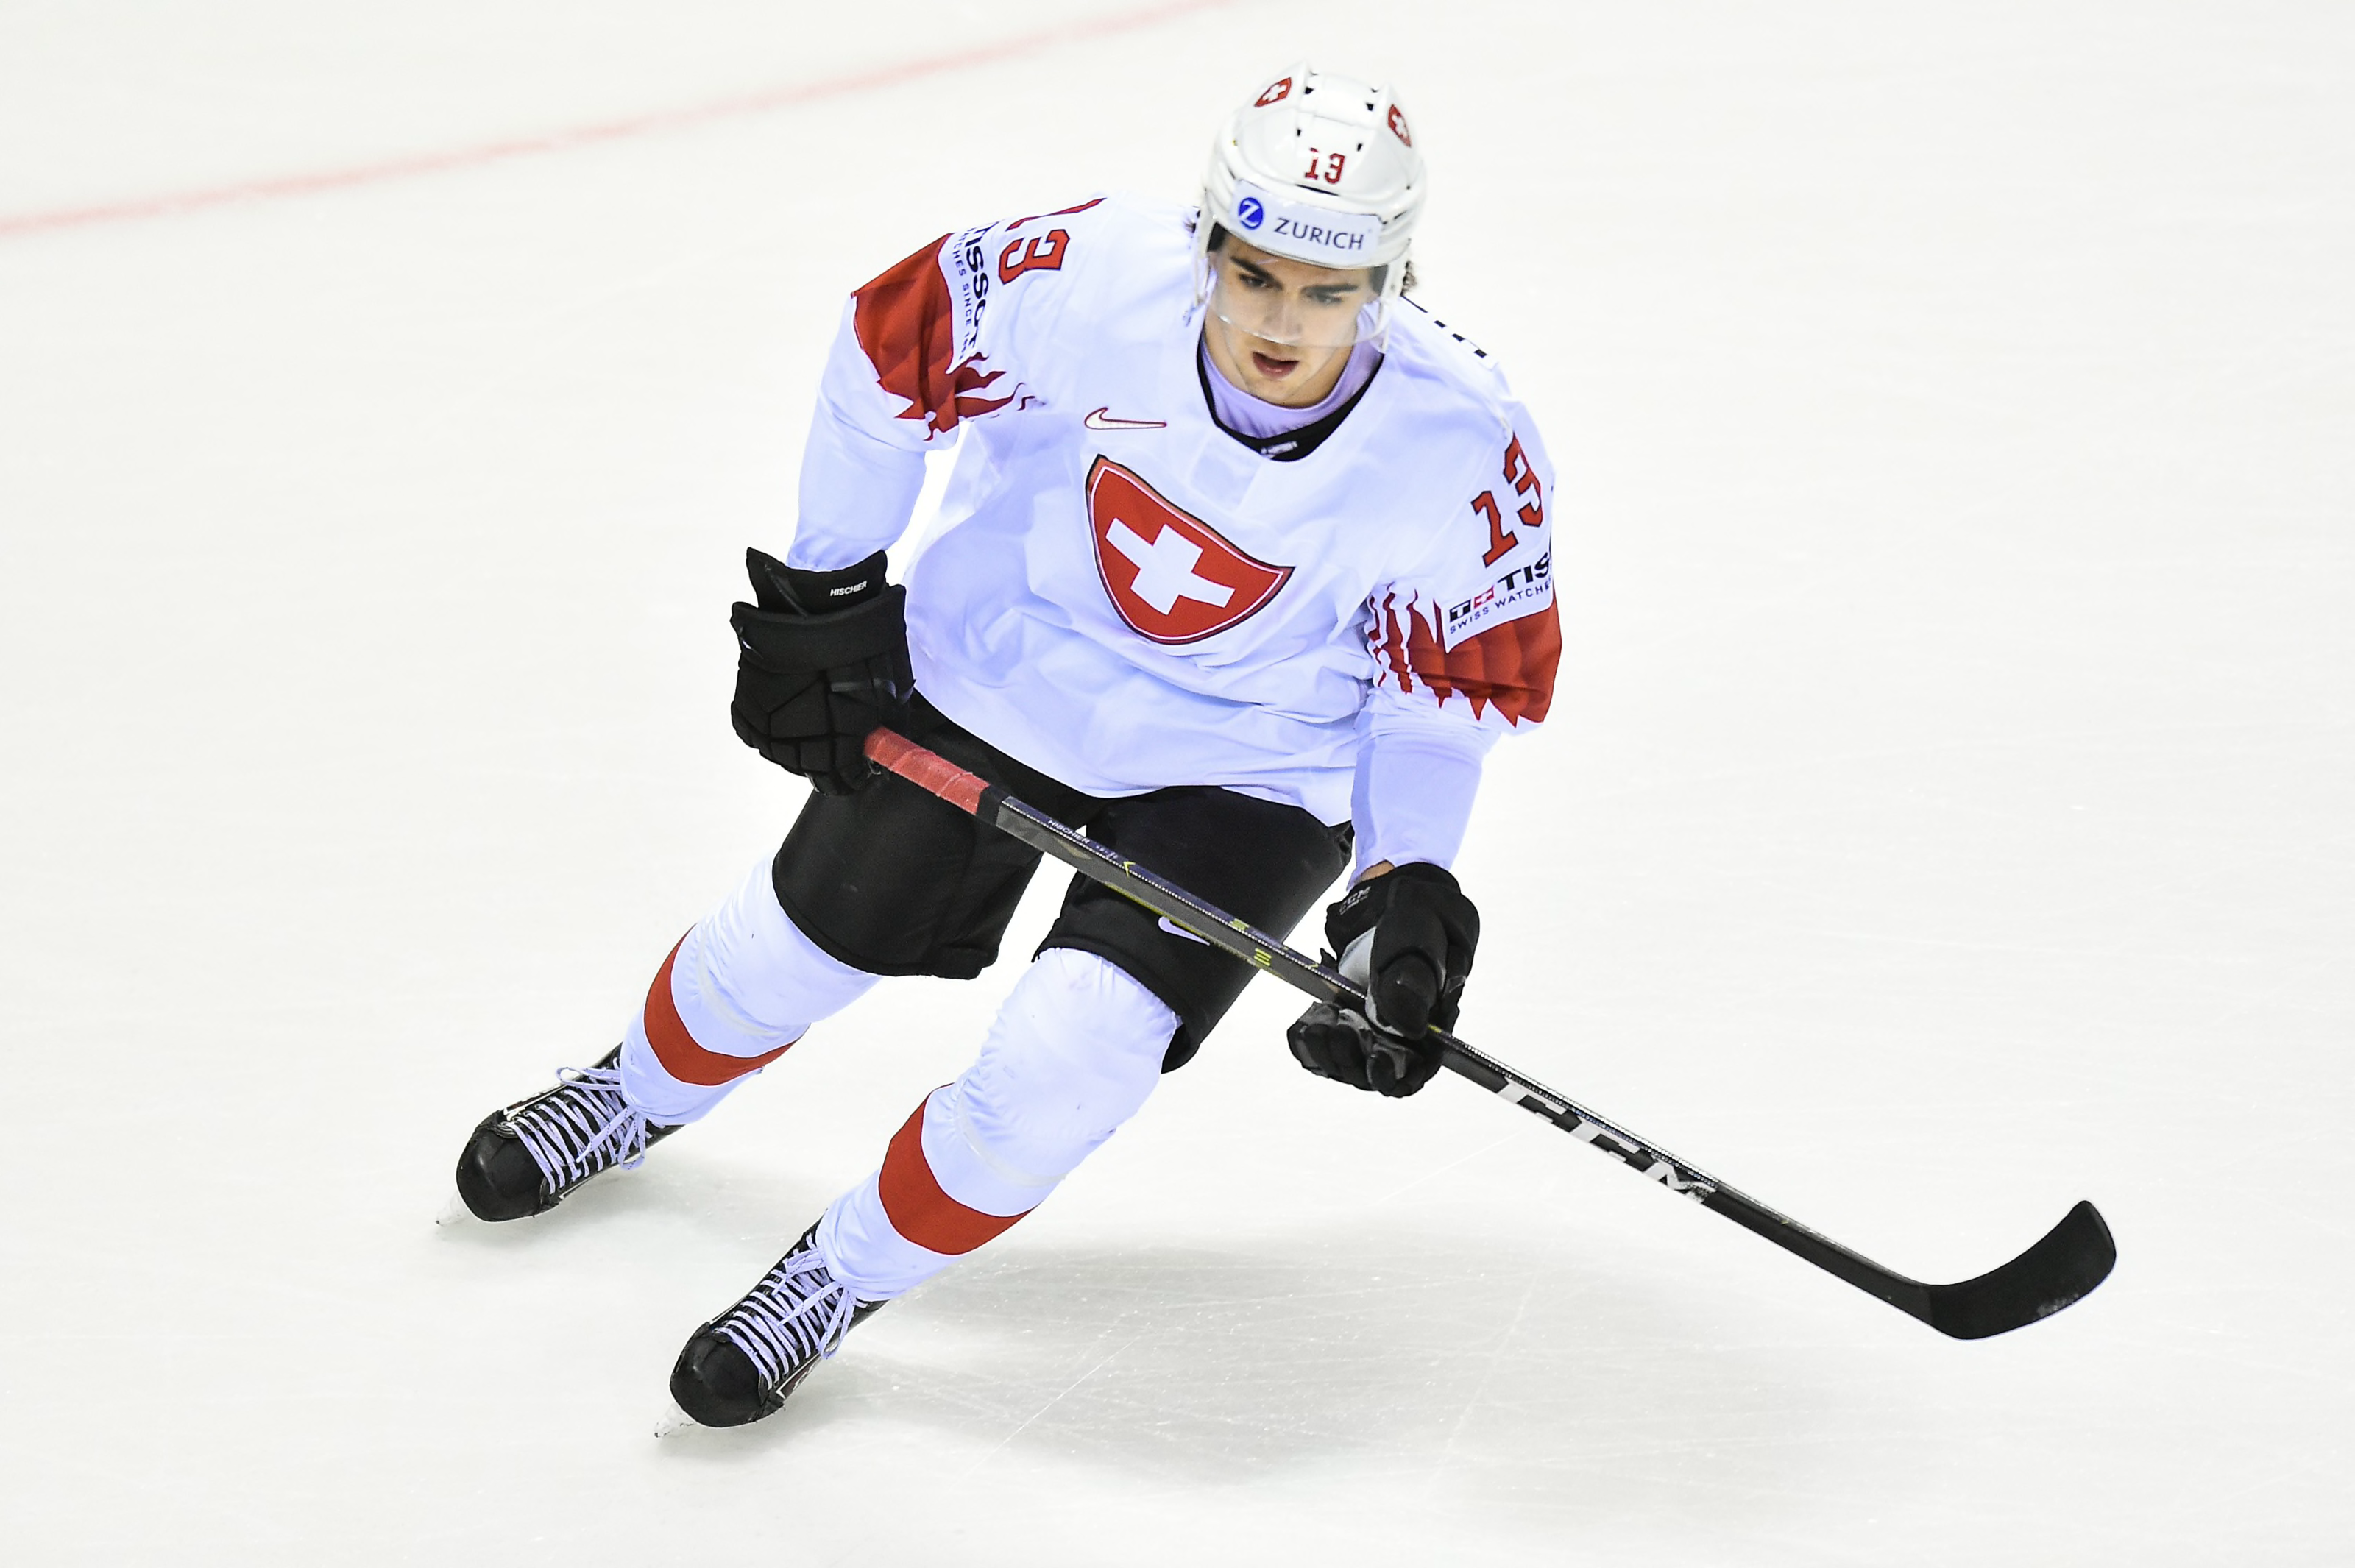 Is Nico Hischier Destined to be the Next New Jersey Devils Captain